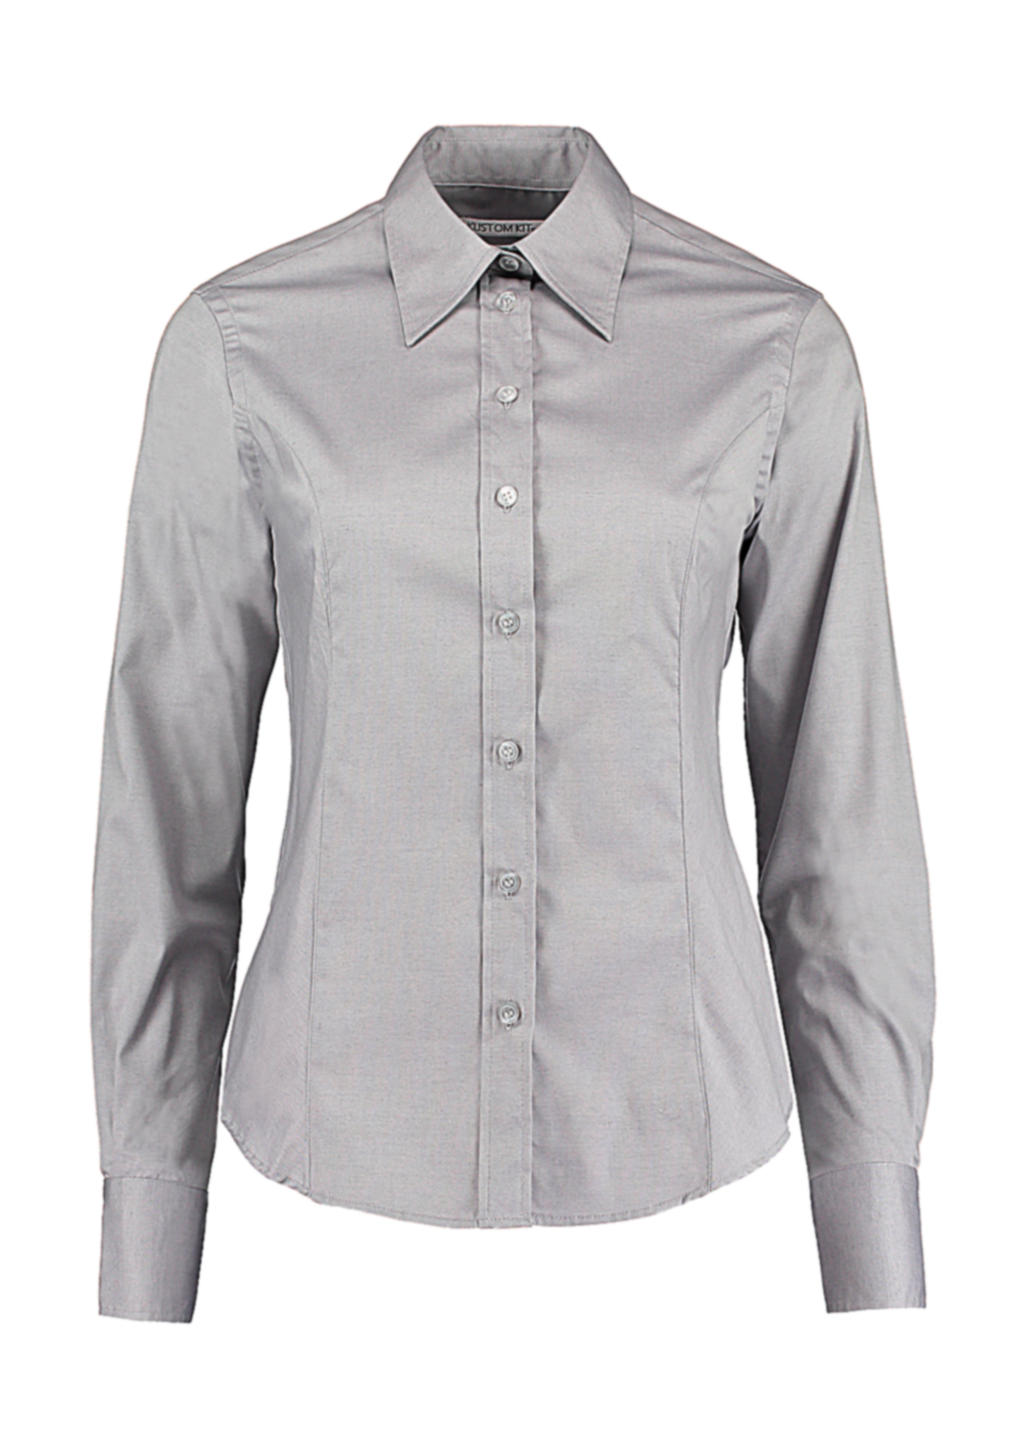  Womens Tailored Fit Premium Oxford Shirt in Farbe Silver Grey